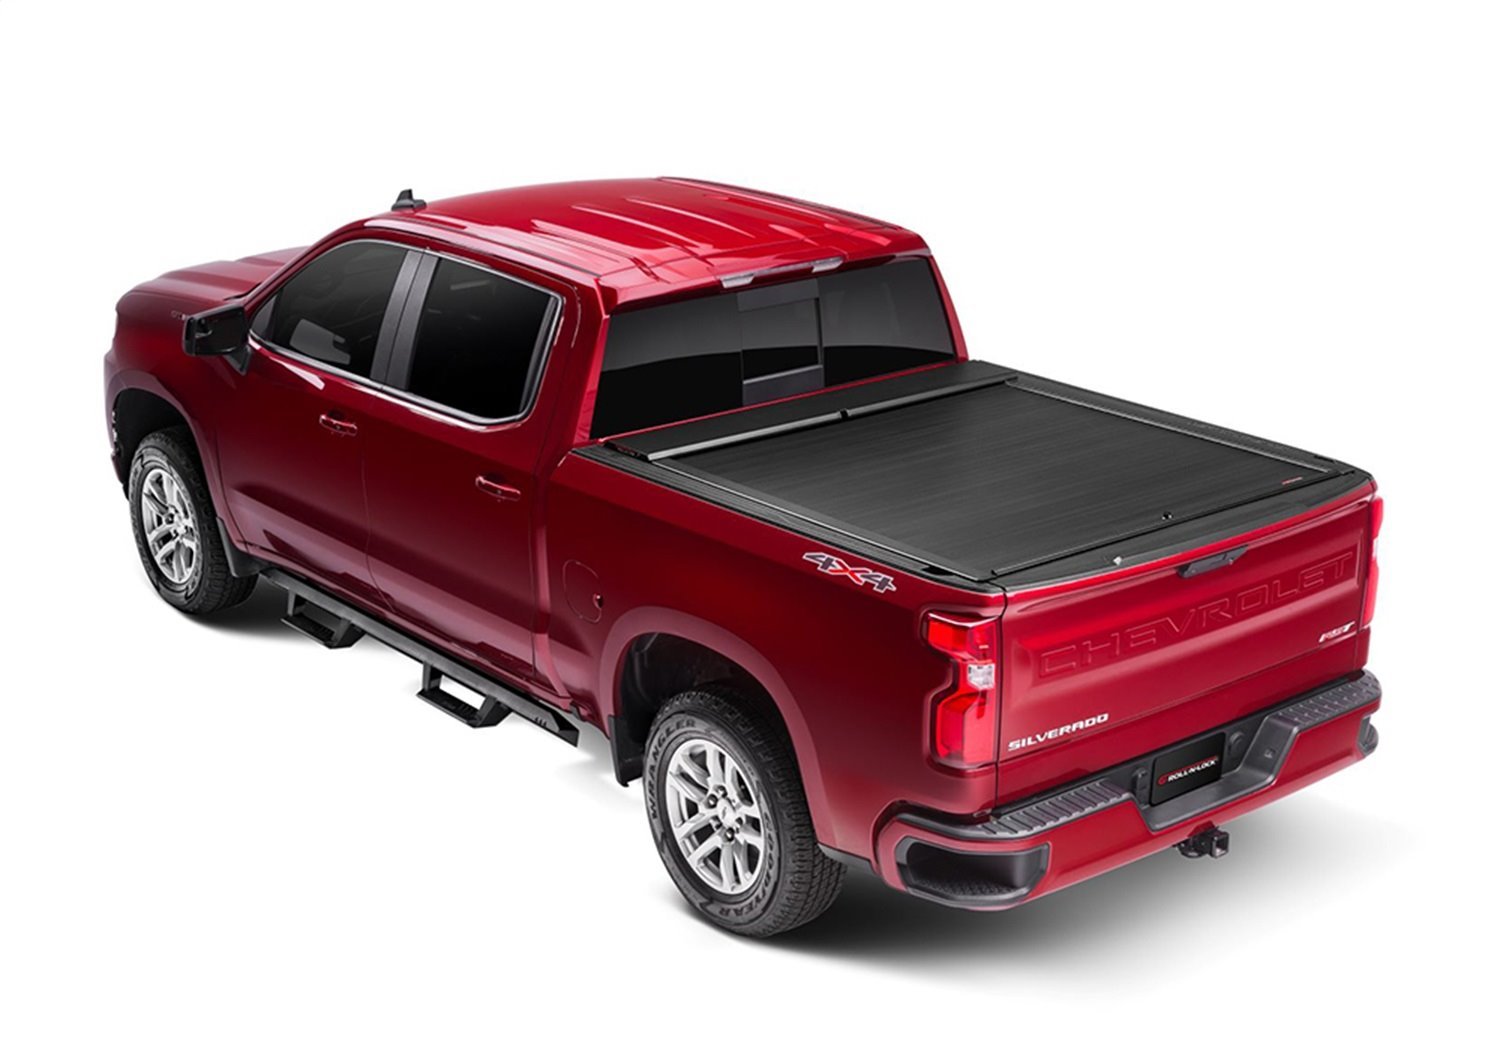 BT220A A-Series Locking Retractable Truck Bed Cover for 2014-2018 GM Silverado/Sierra 1500 [5.8 ft. Bed]